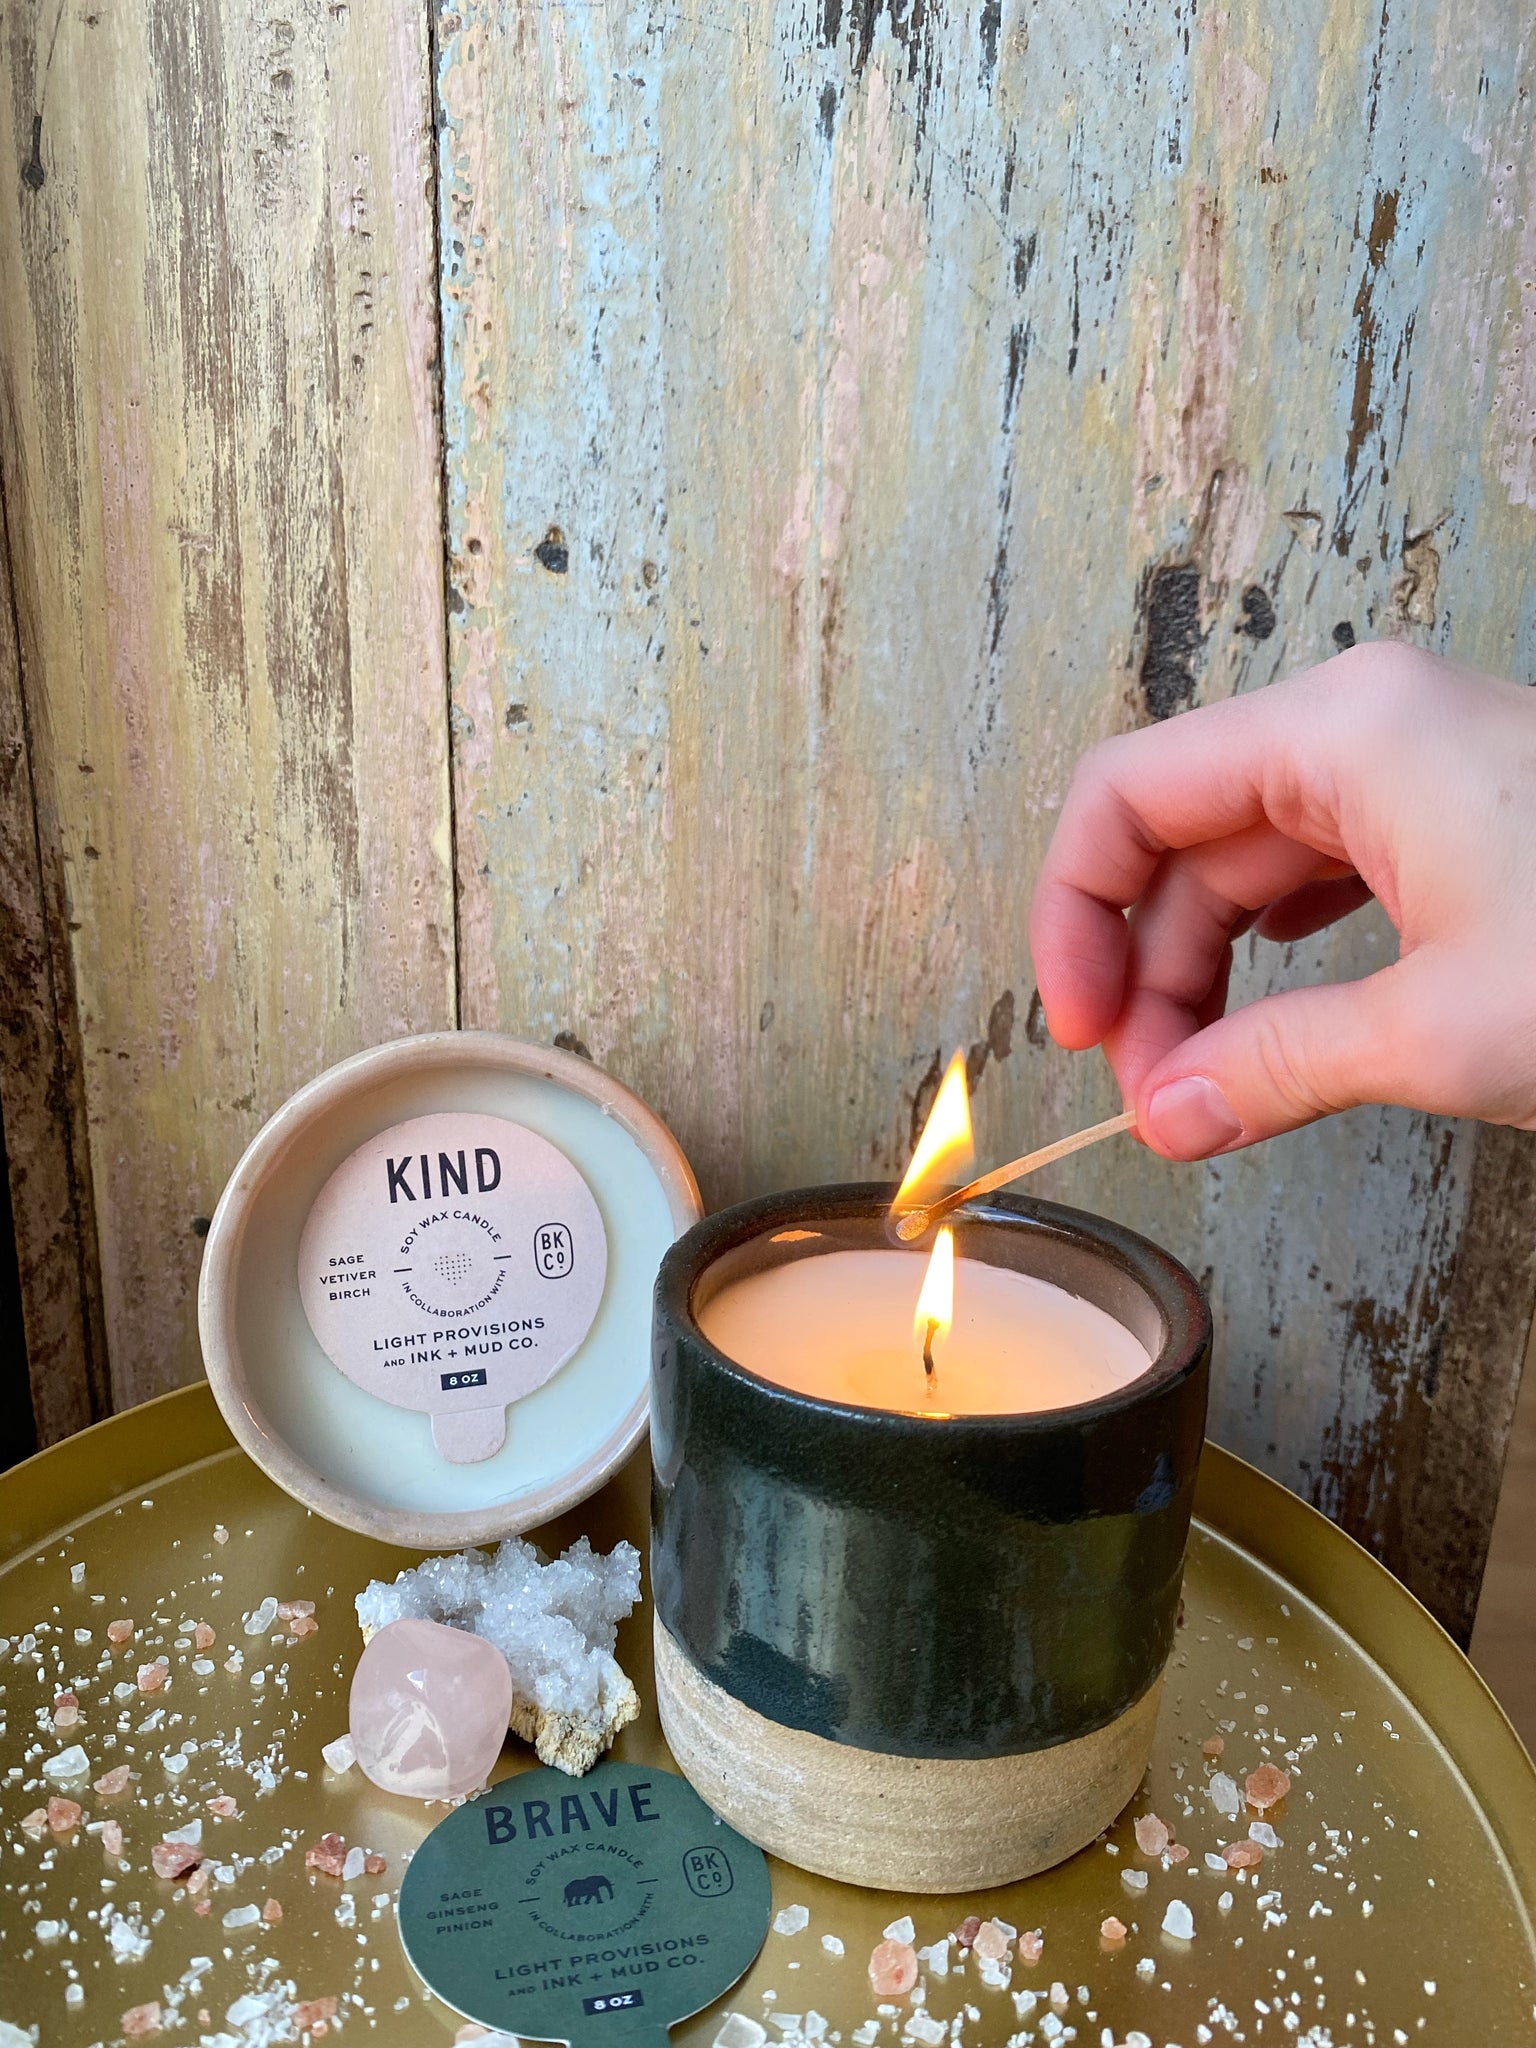 Brave + Kind Signature Candles - Hand Poured in Handcrafted, Reusable Tumblers